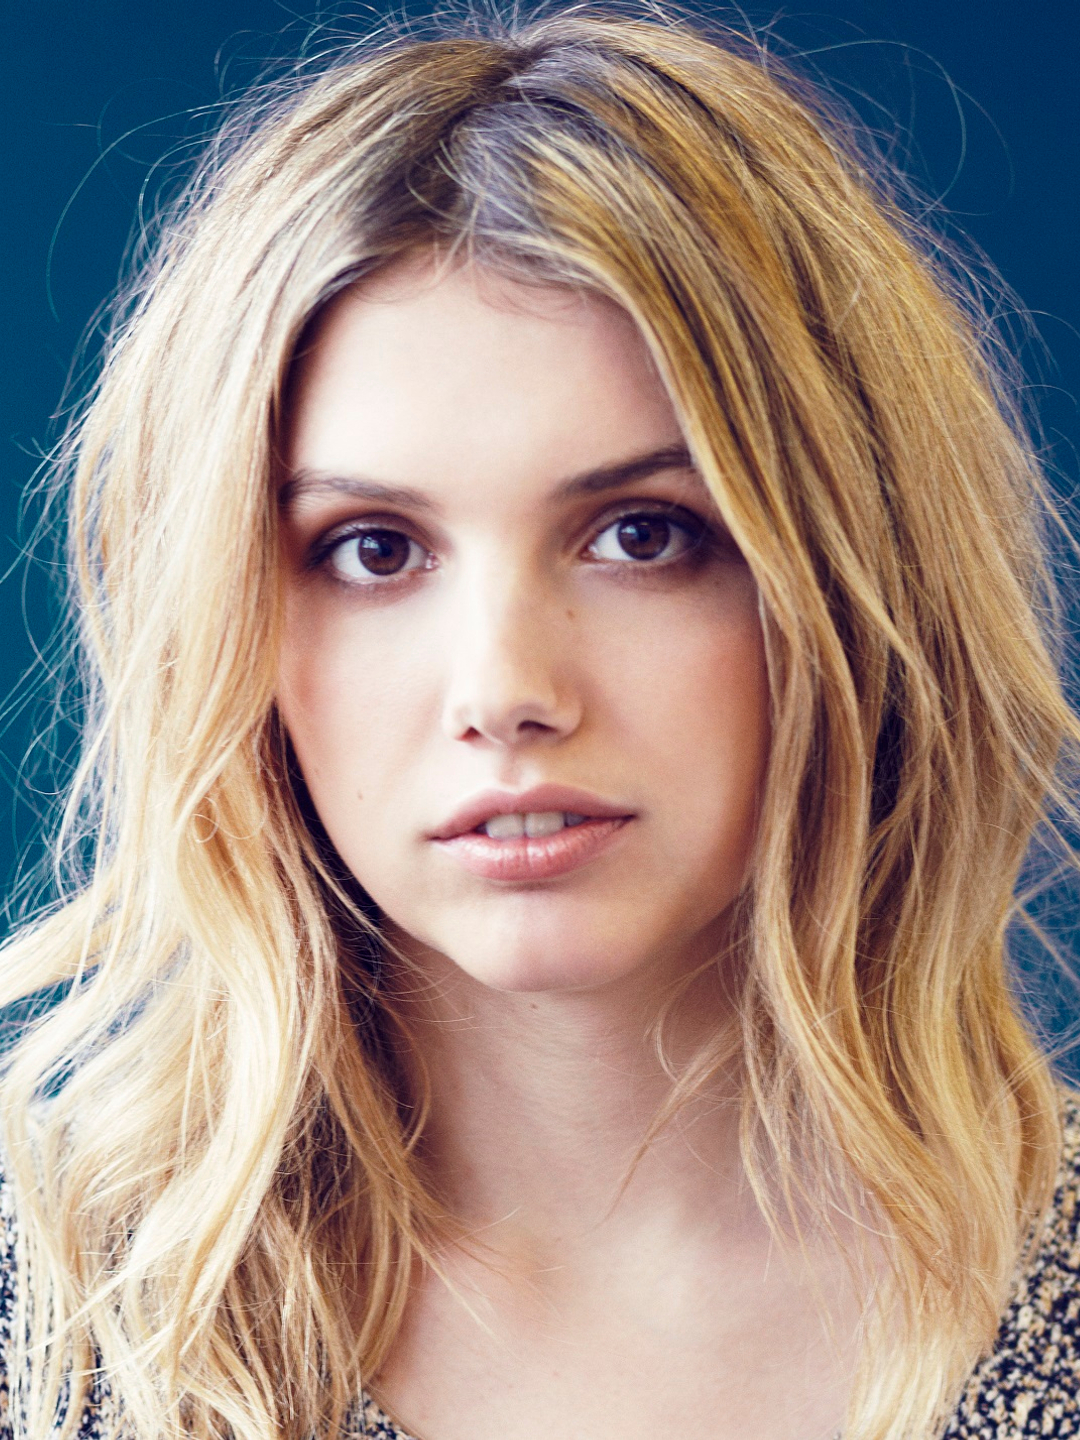 Hannah Murray who are her parents